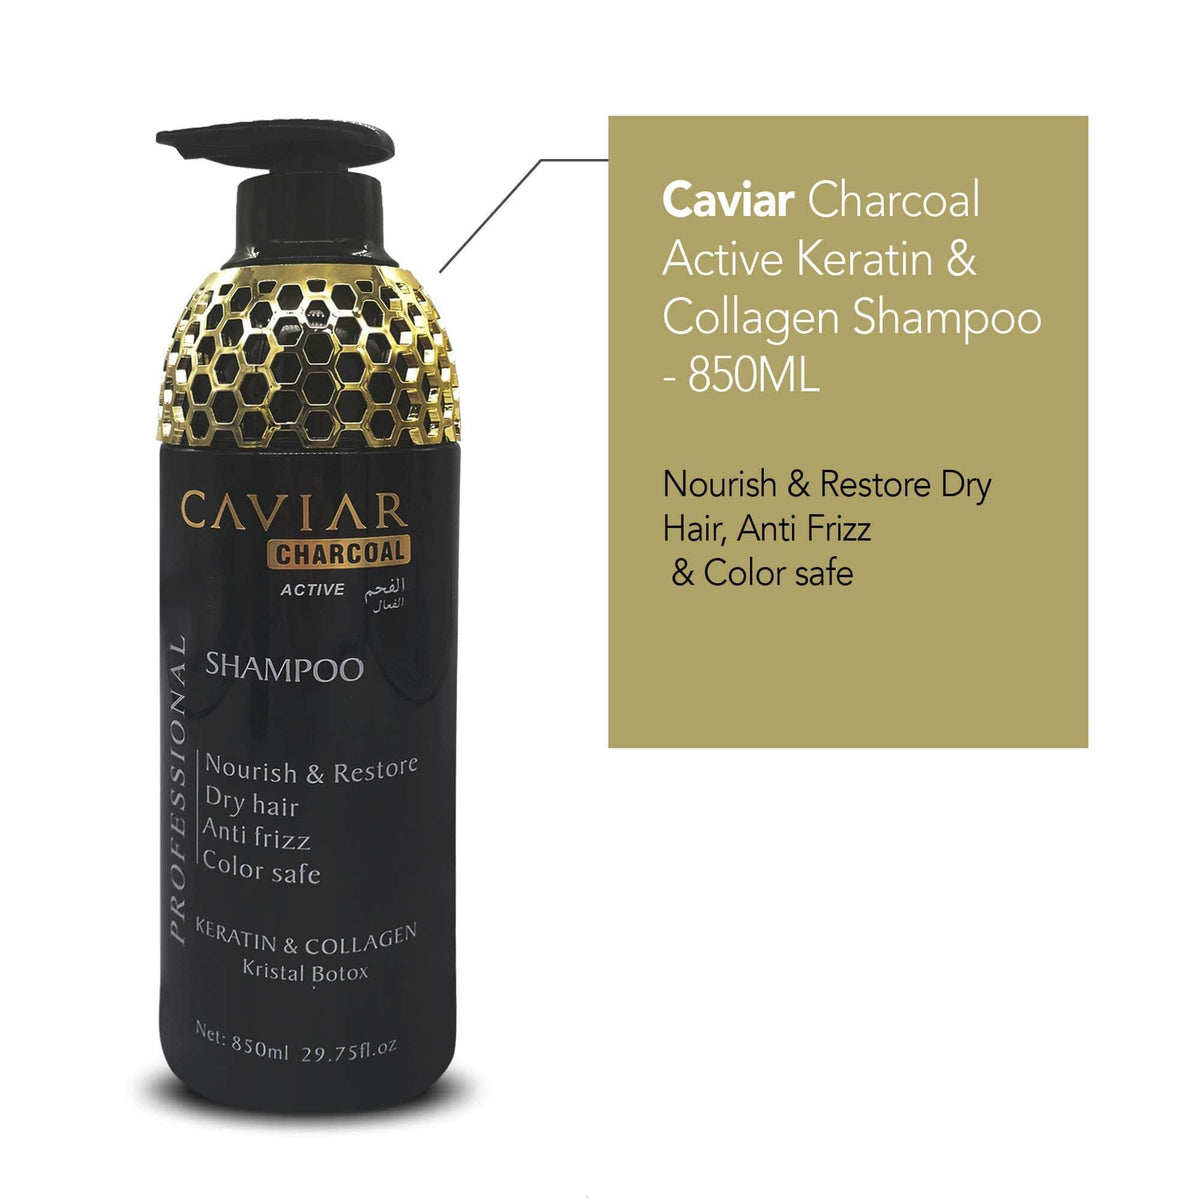 Caviar Shampoo With Active Charcoal, Keratin & Collagen 850ml